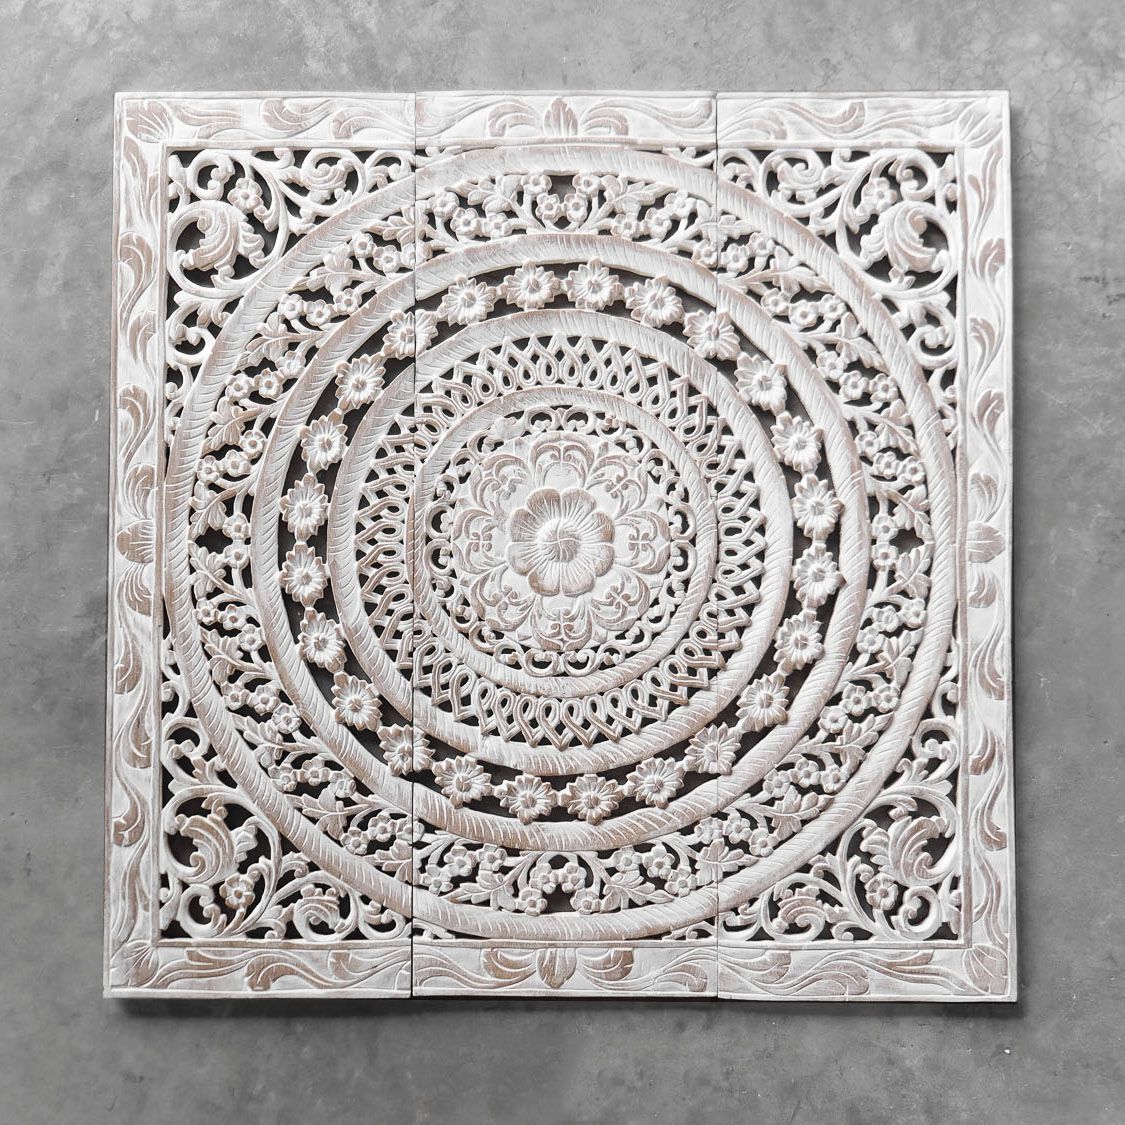 Moroccan Decent Wood Carving Wall Art Hanging Inside Filigree Screen Wall Art (View 12 of 15)